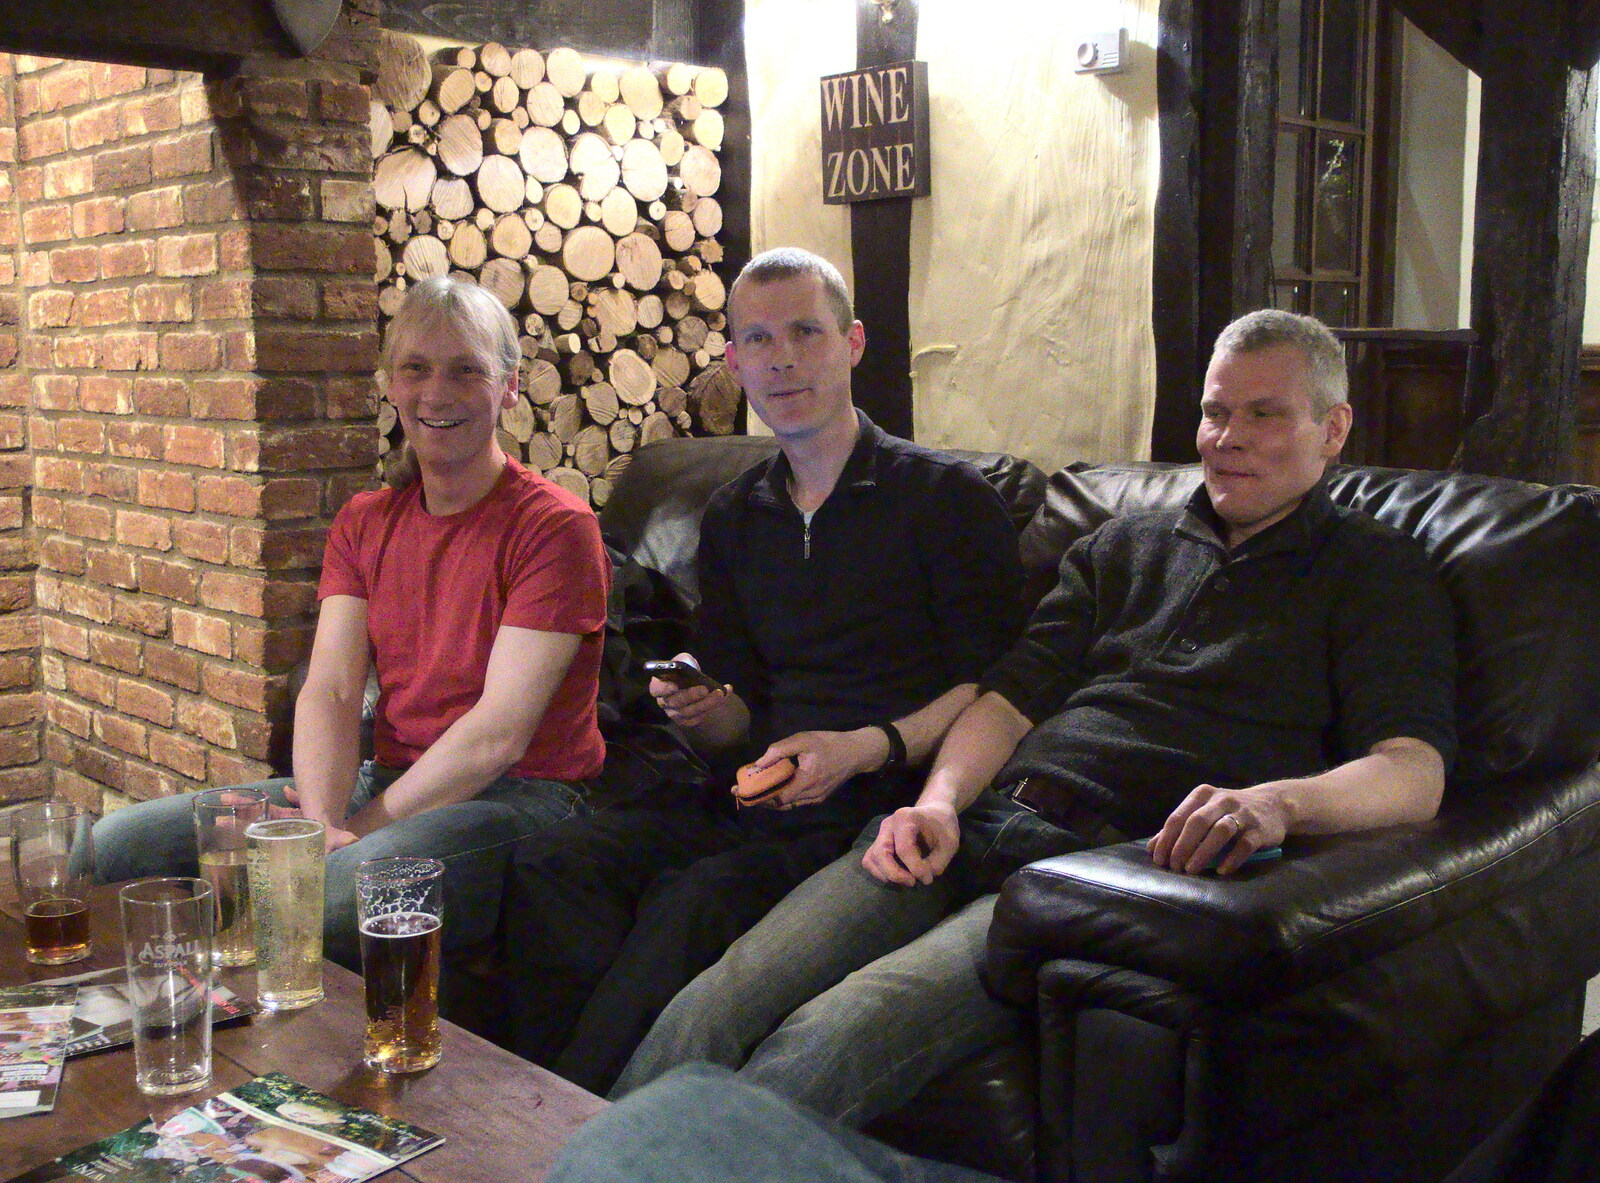 Jimmy, Andy and Bill in the Trowel and Hammer from The Last Day of Pre-School and Beer at the Trowel and Hammer, Cotton, Suffolk - 29th March 2015